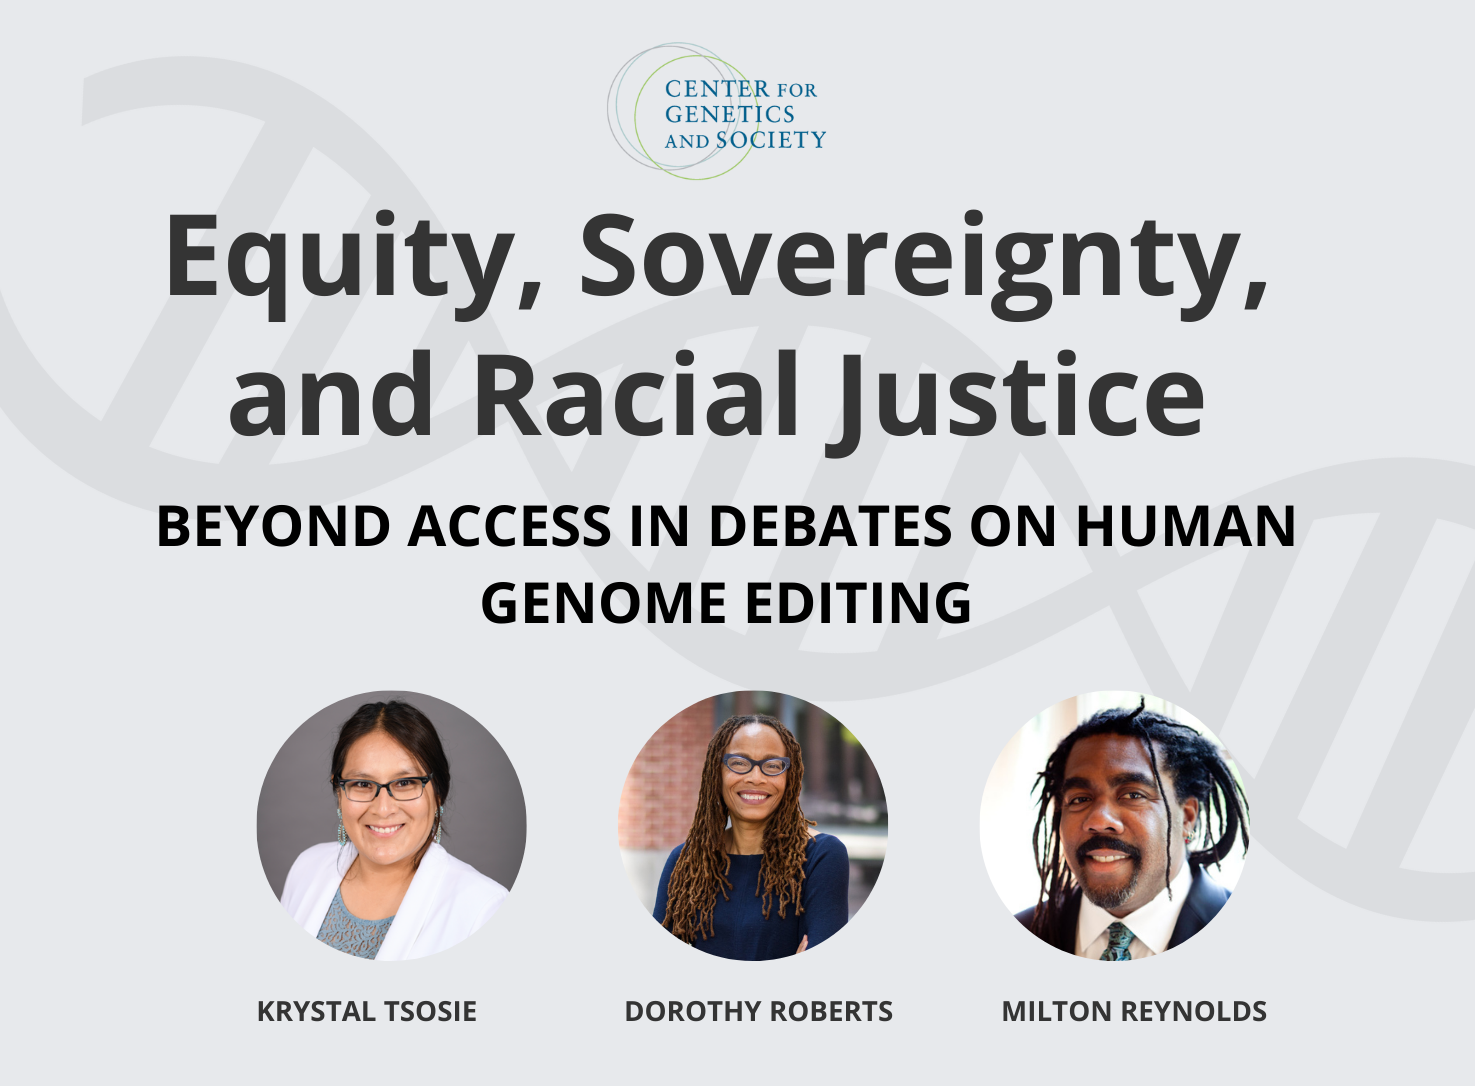 Equity, Sovereignty, and Racial Justice flyer featuring speaker headshots